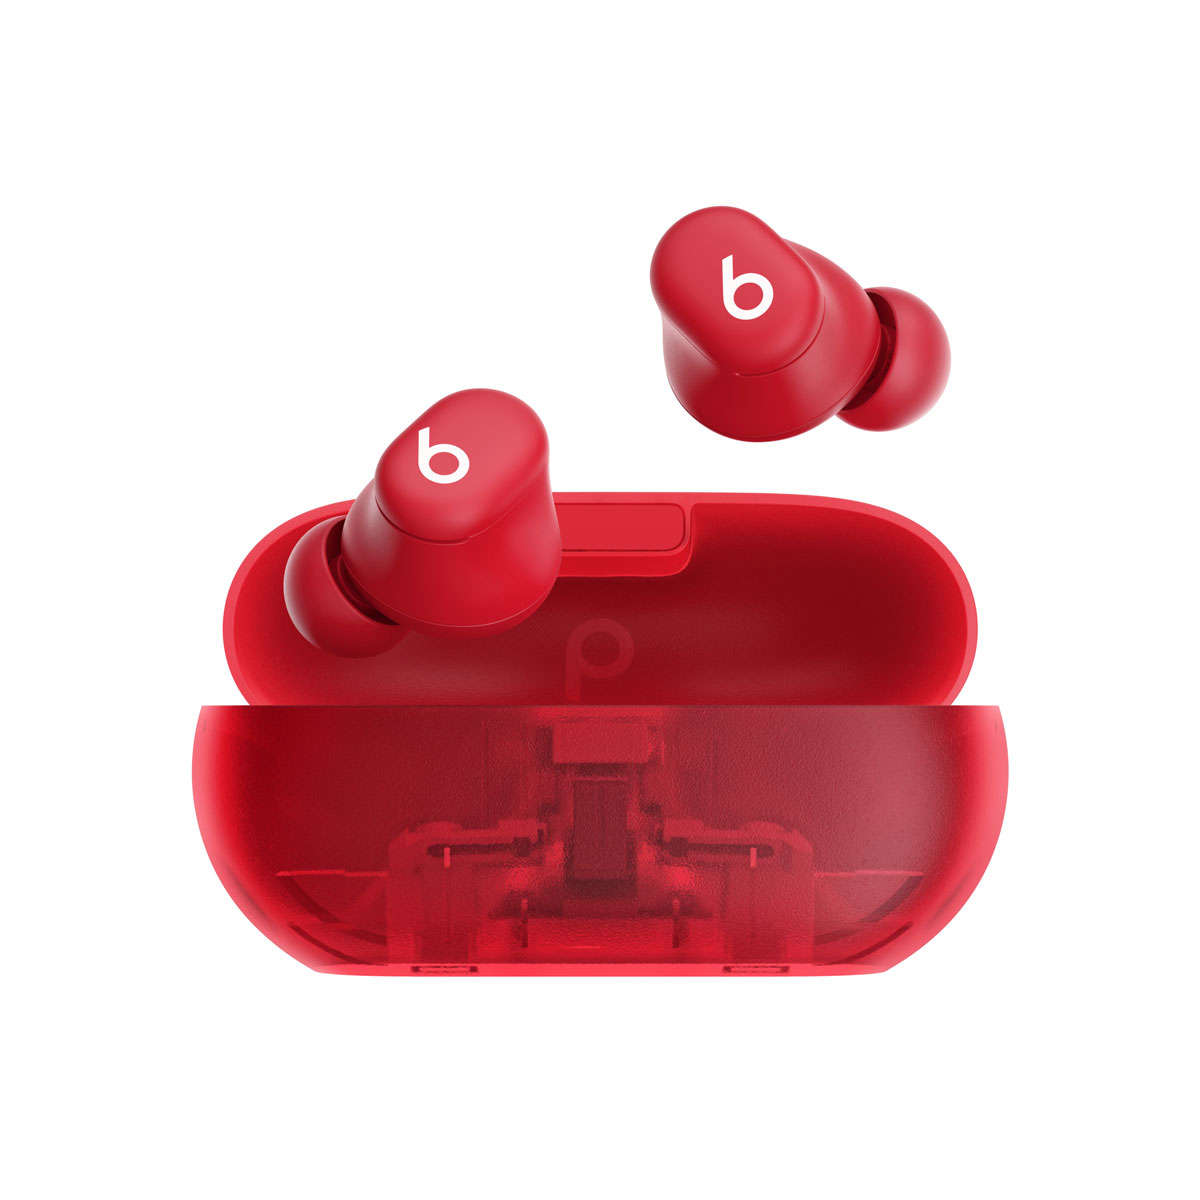 A pair of Beats Solo Buds